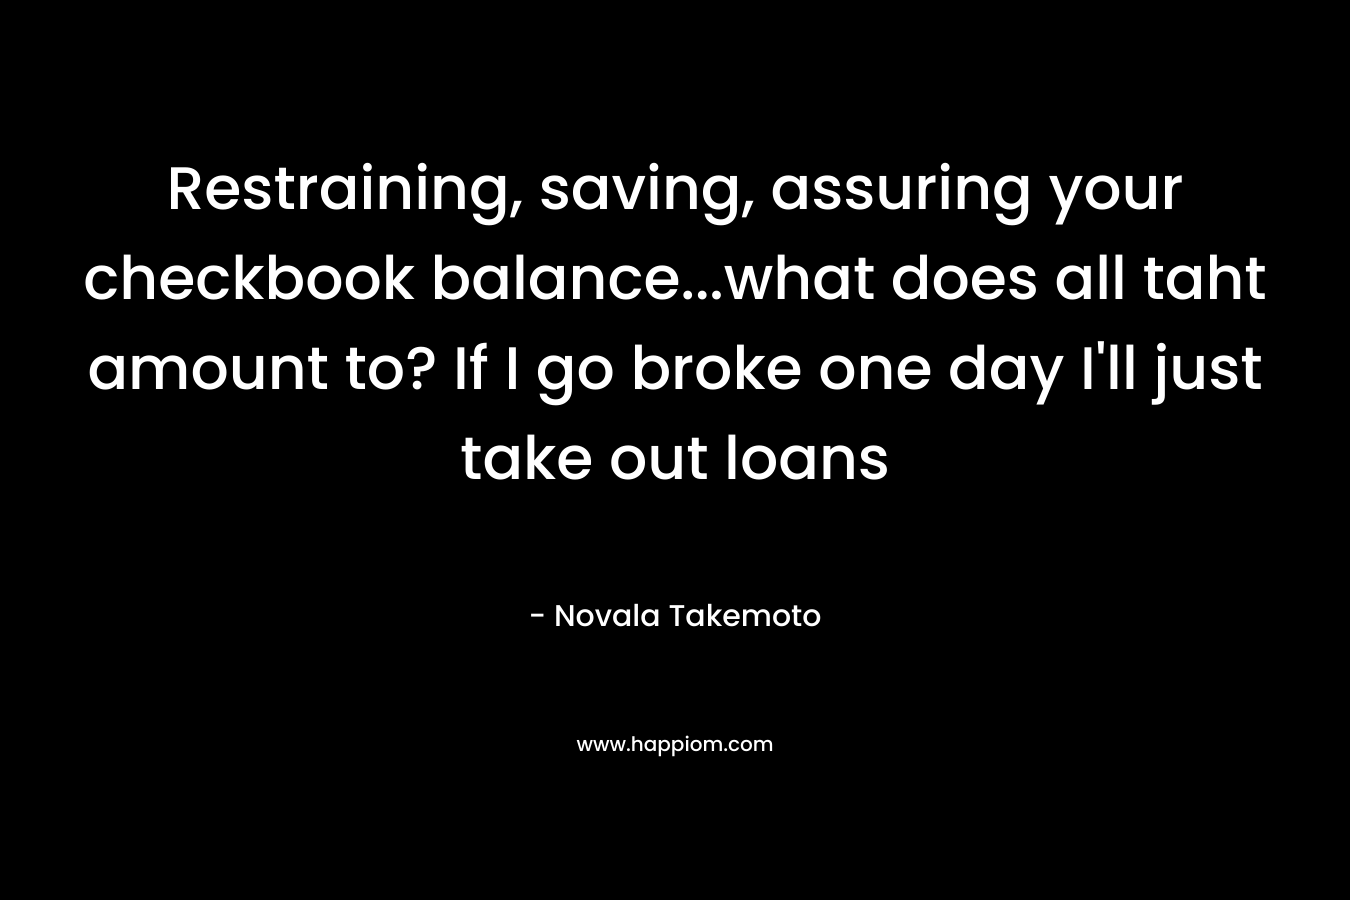 Restraining, saving, assuring your checkbook balance…what does all taht amount to? If I go broke one day I’ll just take out loans – Novala Takemoto